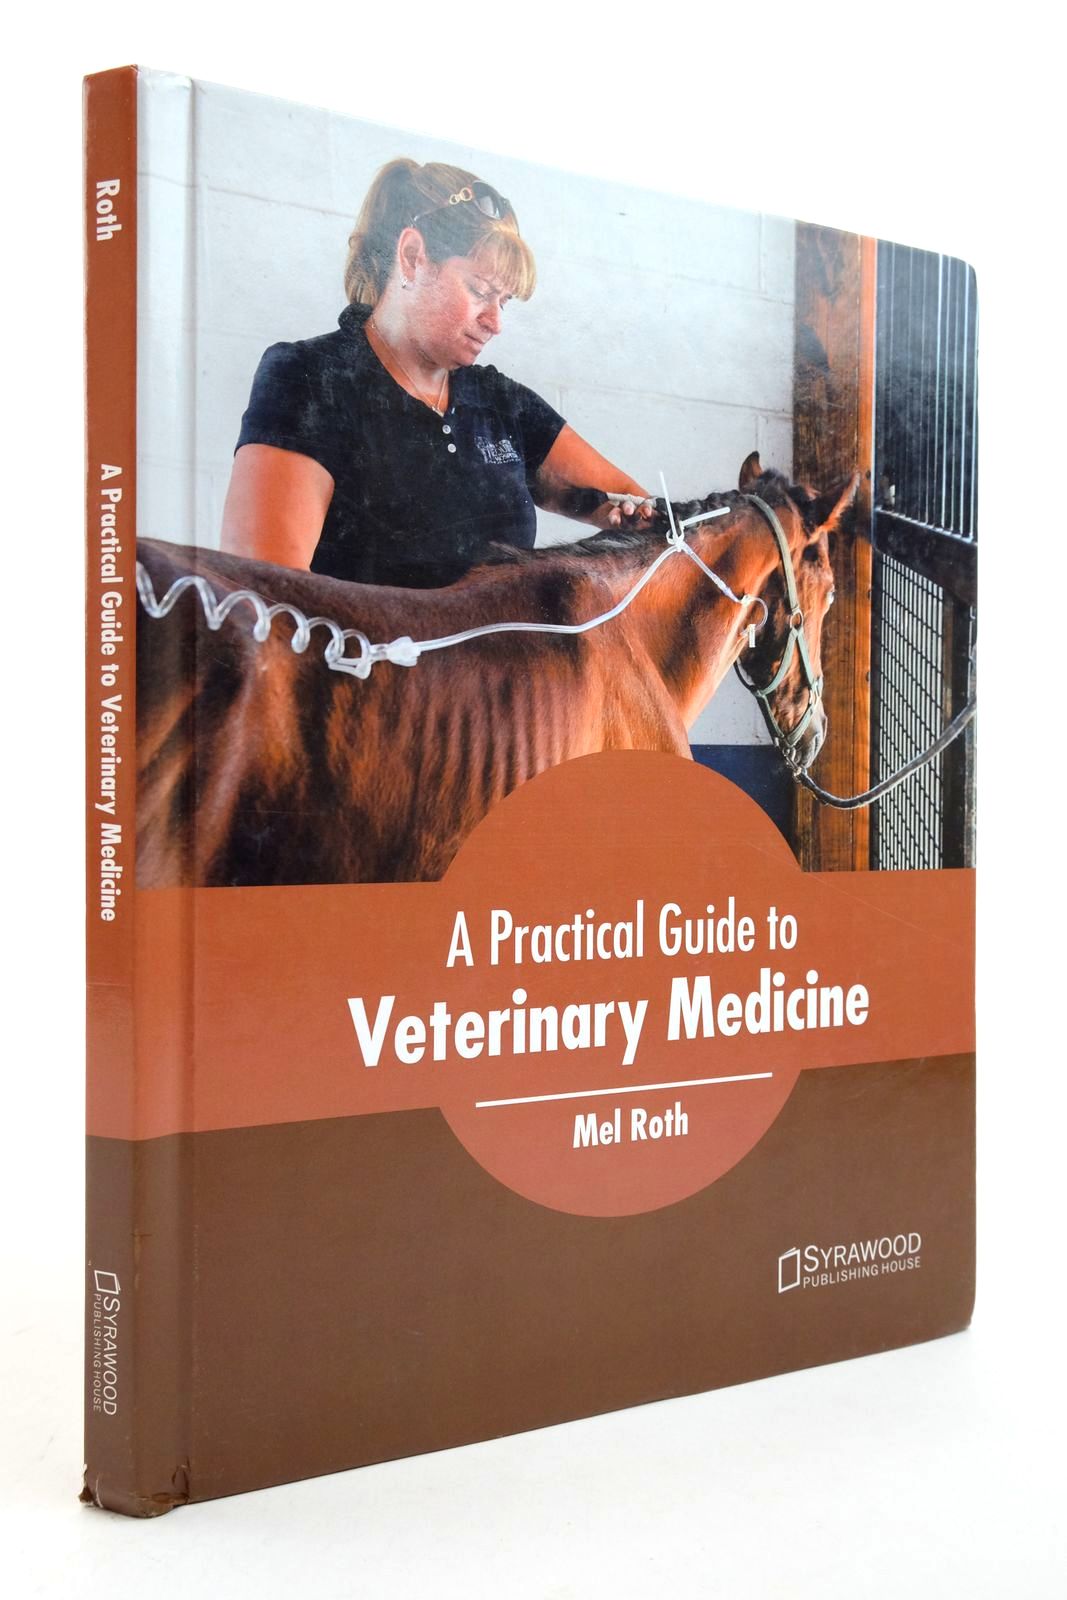 Photo of A PRACTICAL GUIDE TO VETERINARY MEDICINE written by Roth, Mel published by Syrawood Publishing House (STOCK CODE: 2140224)  for sale by Stella & Rose's Books